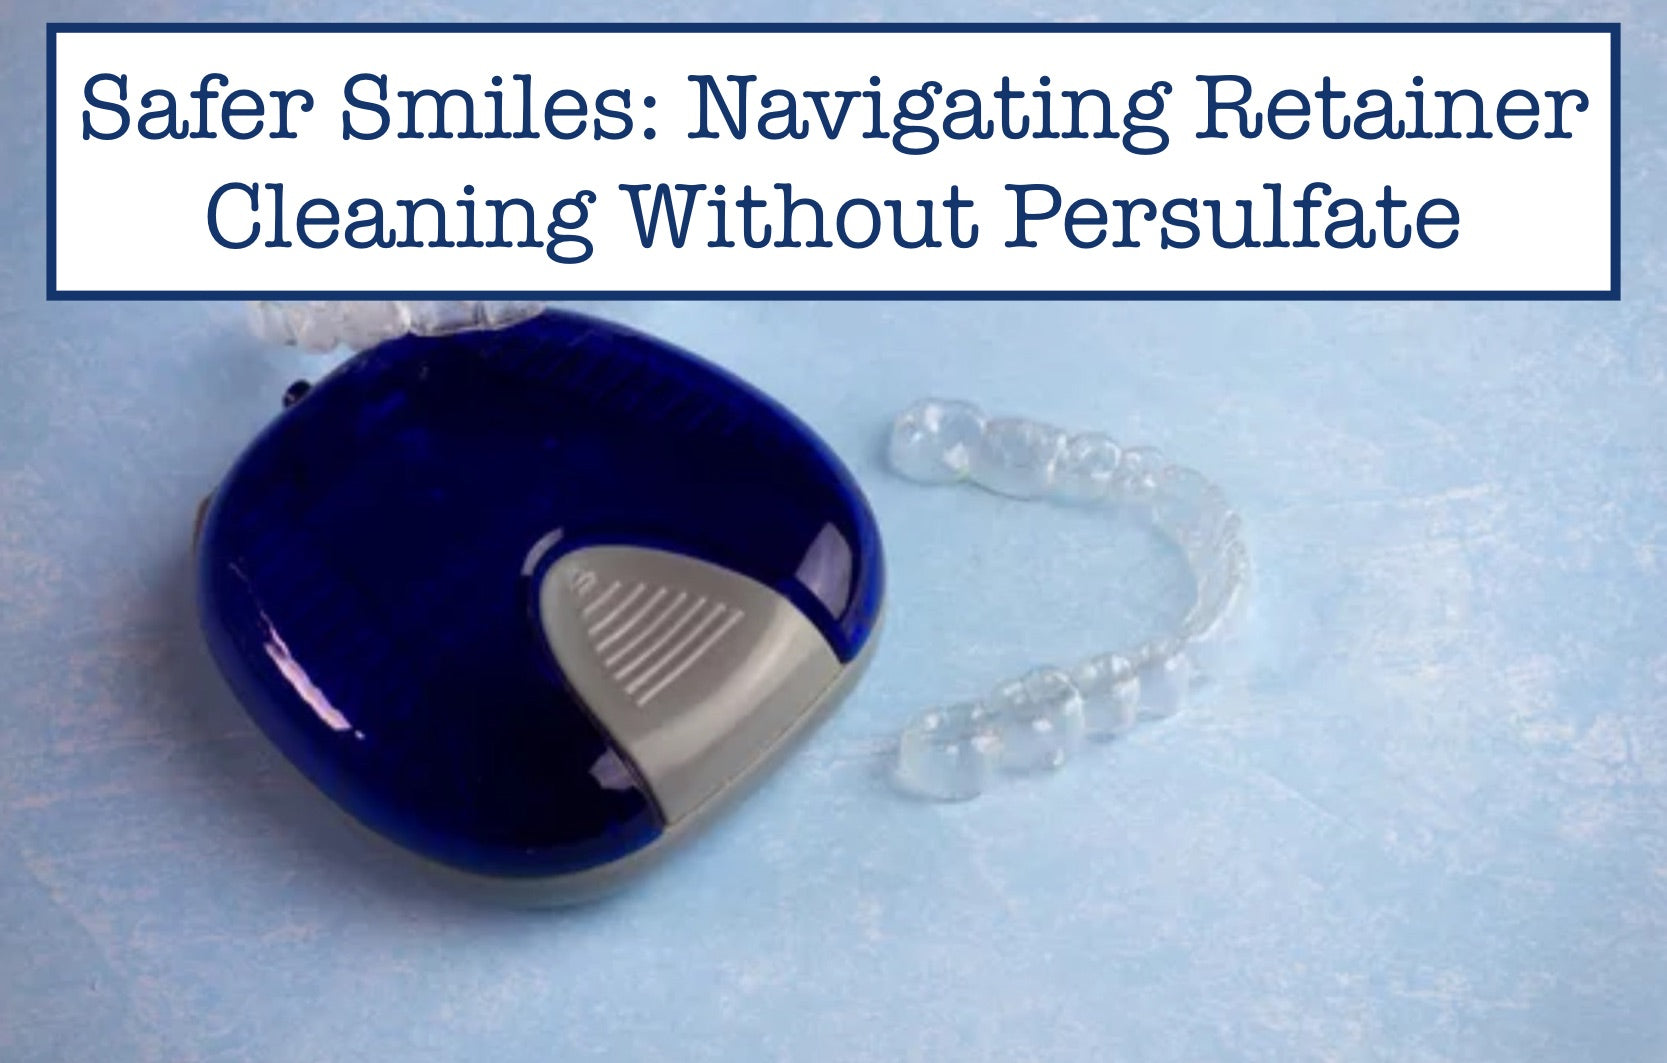 Safer Smiles: Navigating Retainer Cleaning Without Persulfate